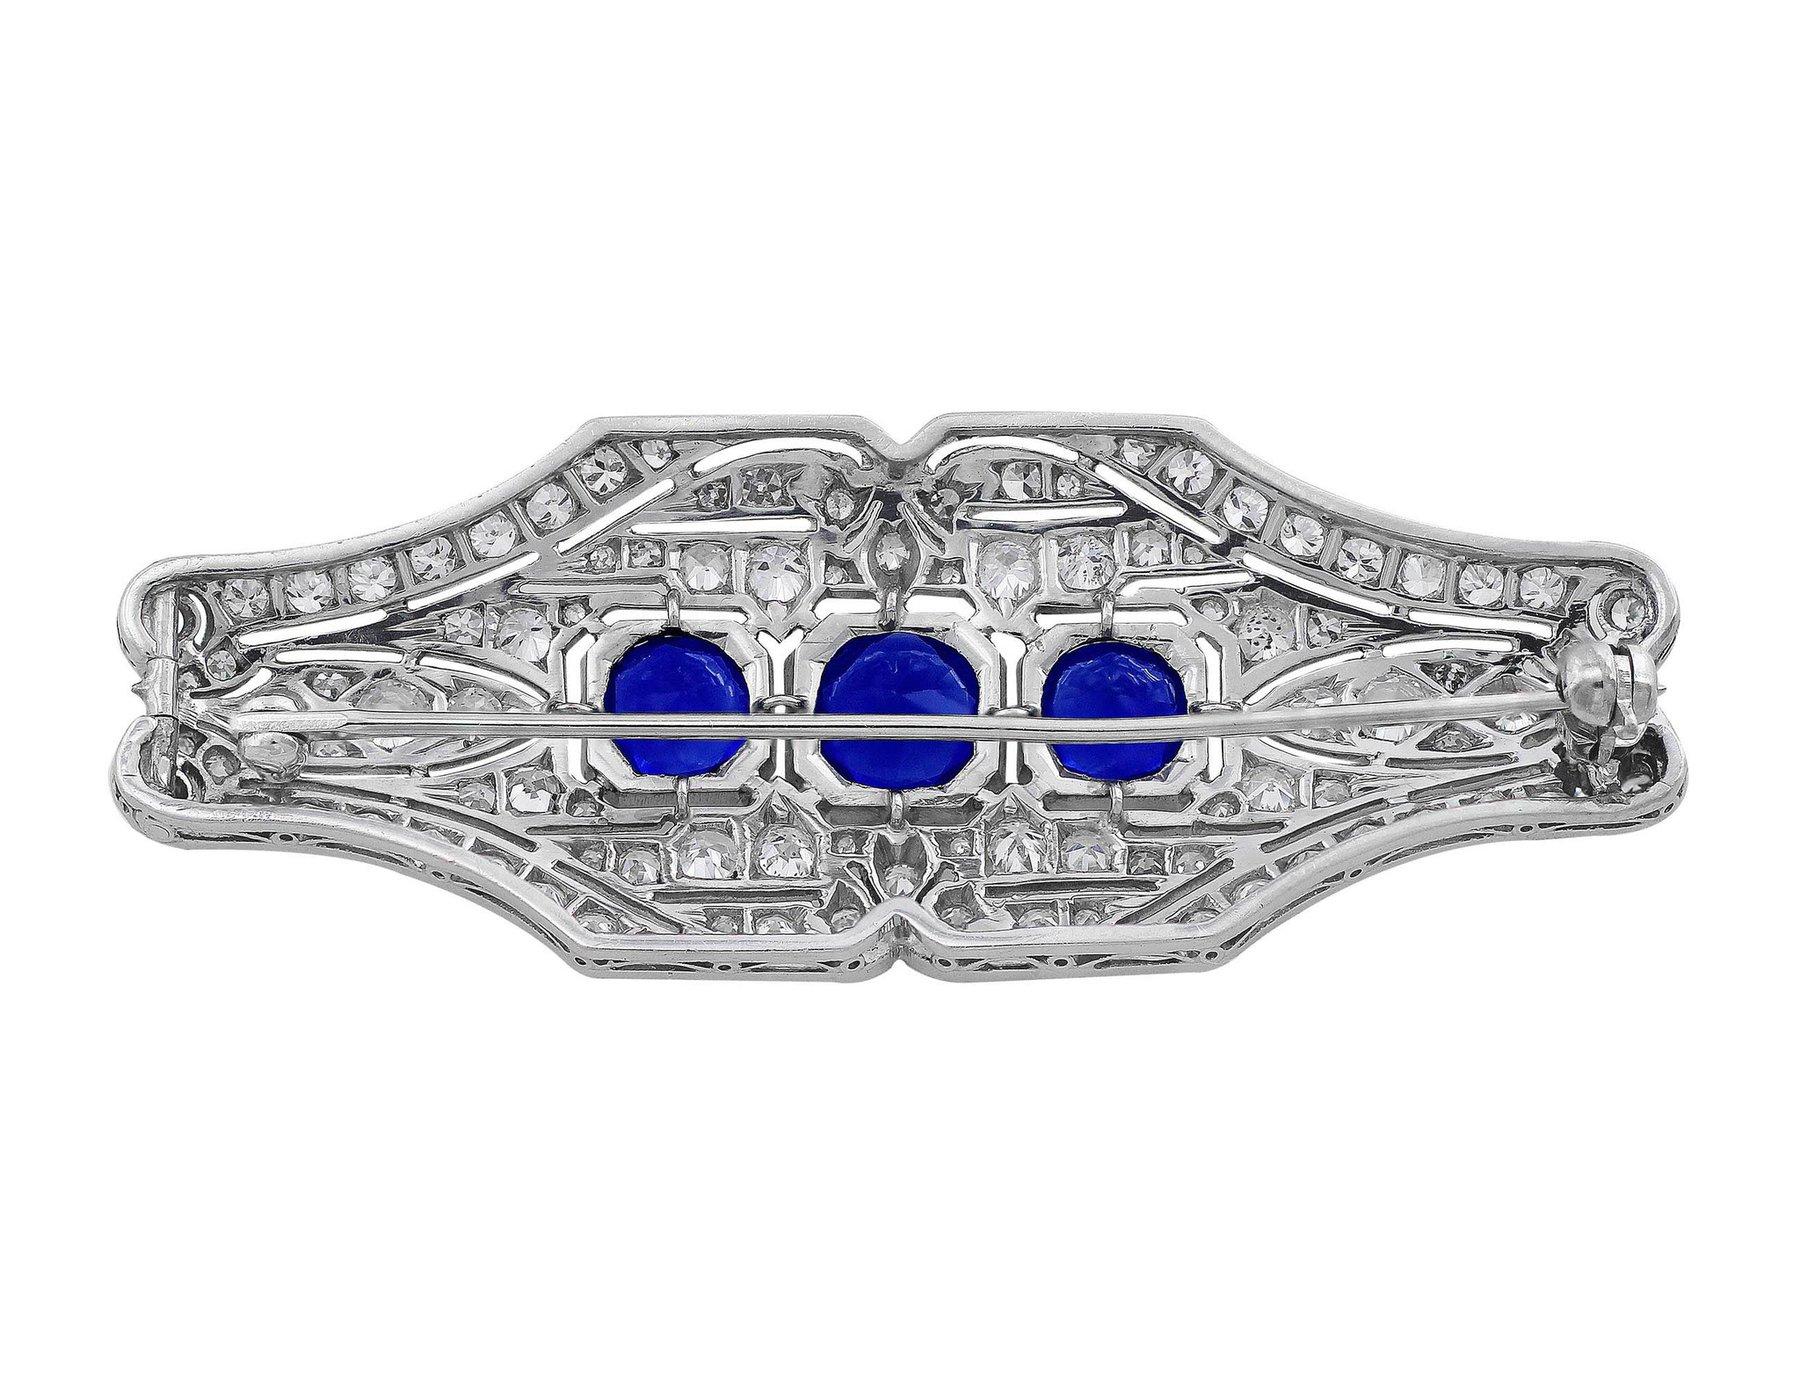 Platinum diamond and sapphire brooch. The three sapphires are approximately 2.55ctw and diamonds 2.00ctw.